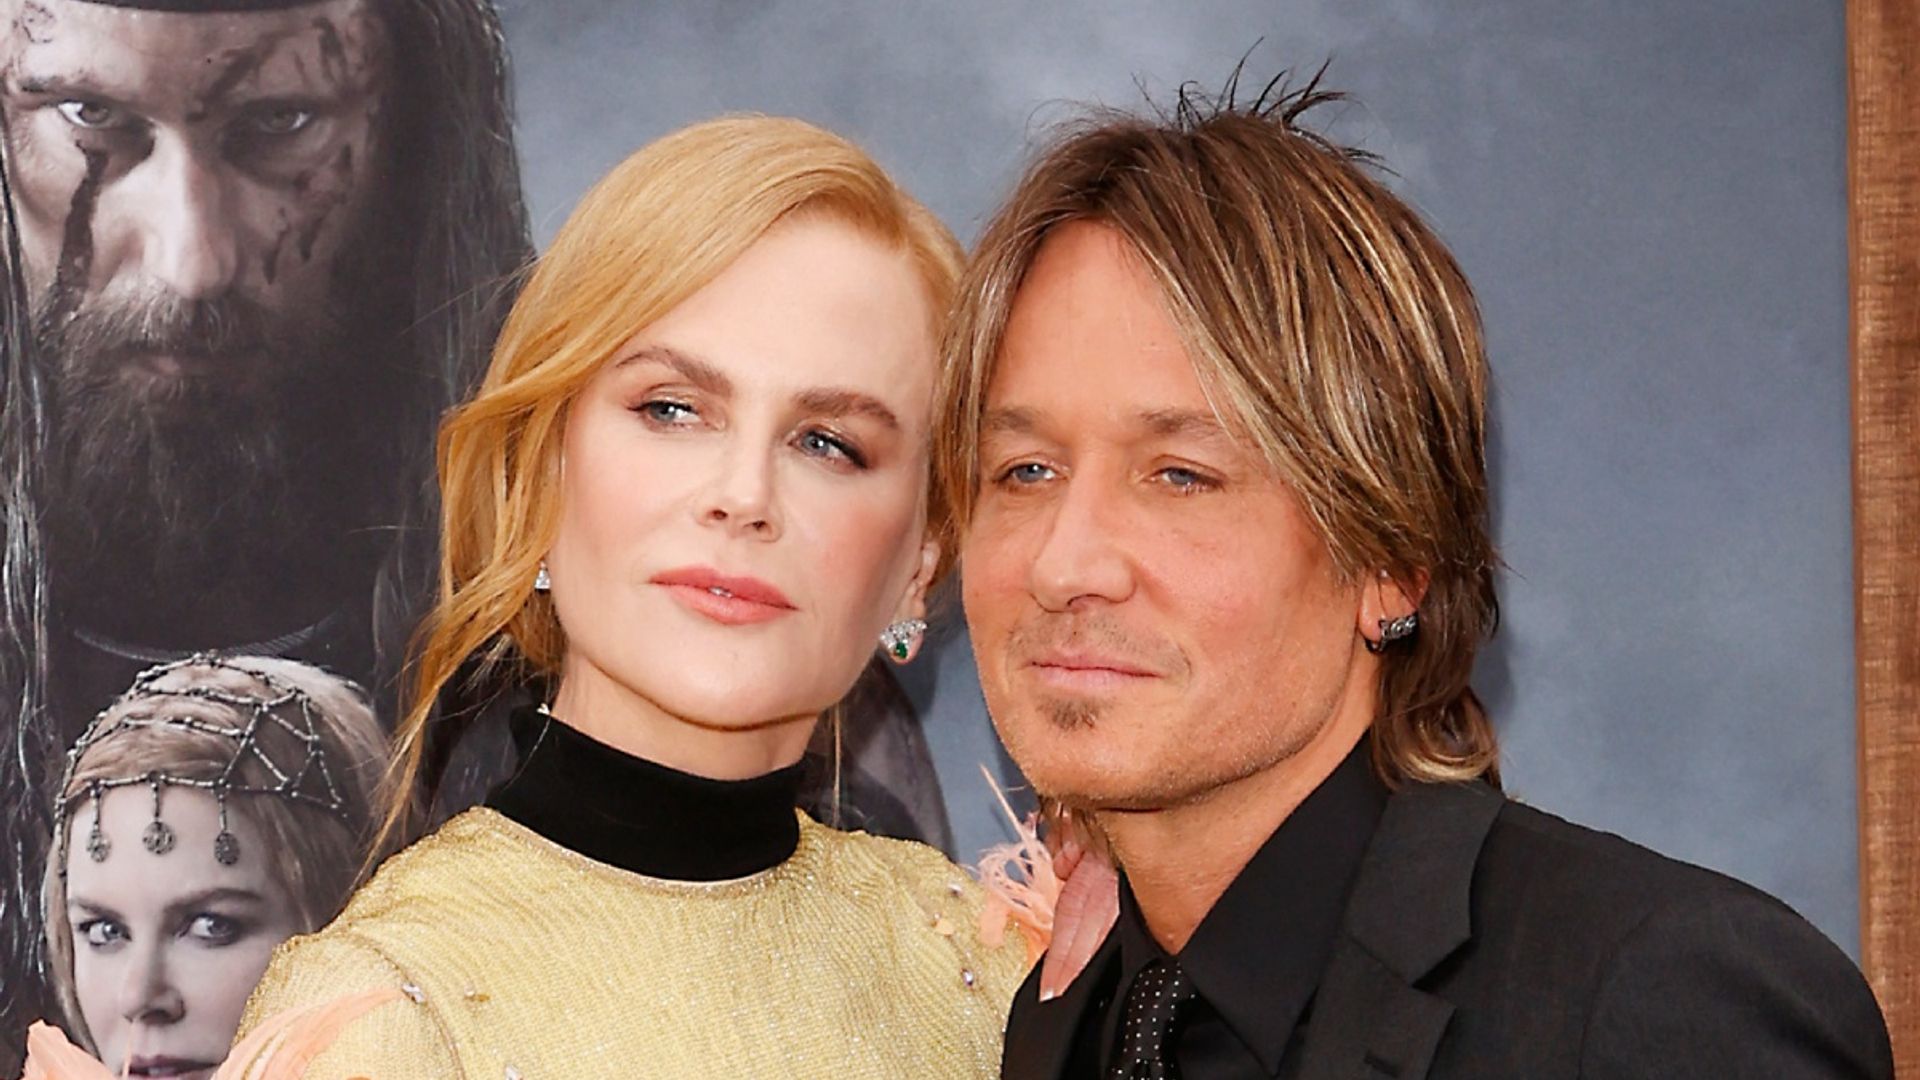 Nicole Kidman and Keith Urban mourn Naomi Judd with moving musical tribute